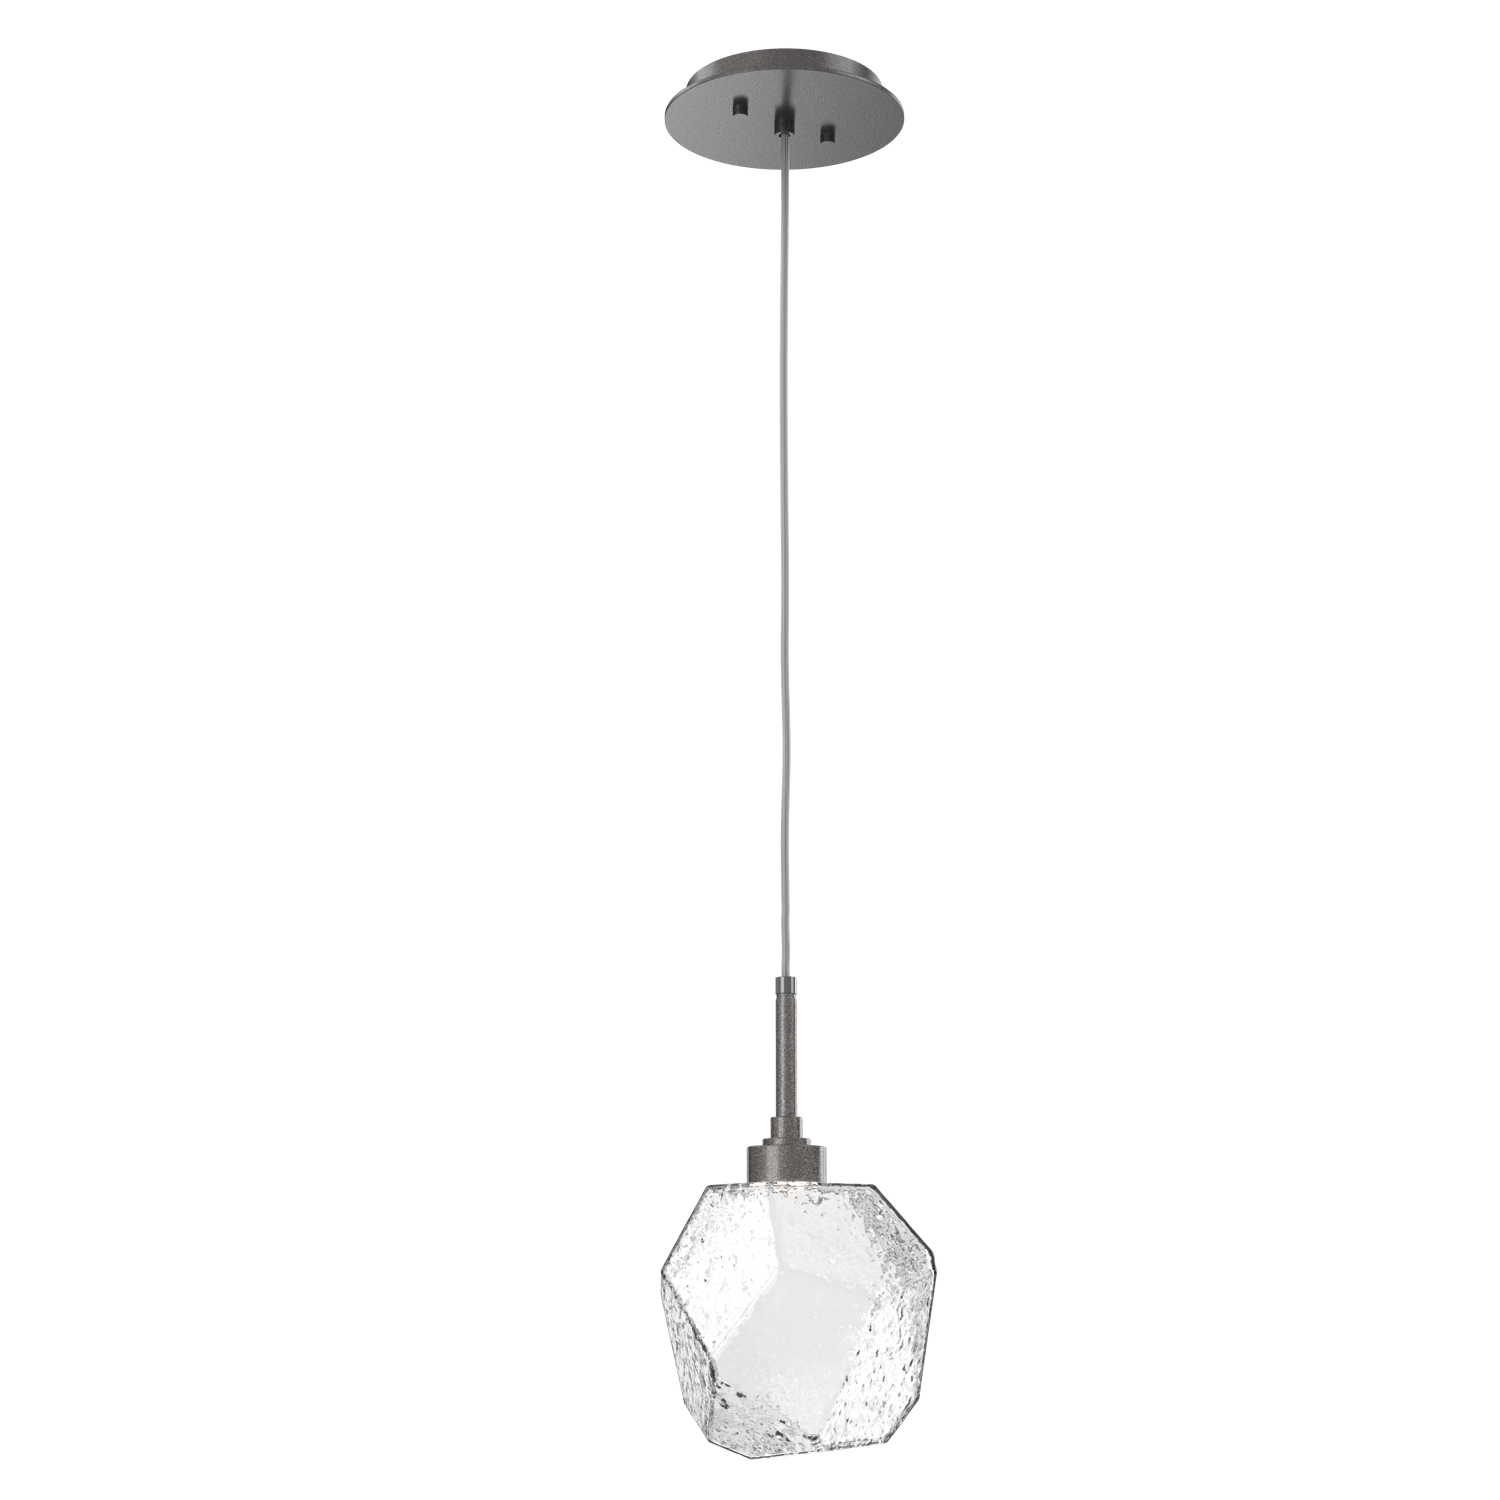 LAB0039-01-GP-C-Hammerton-Studio-Gem-pendant-light-with-graphite-finish-and-clear-blown-glass-shades-and-LED-lamping